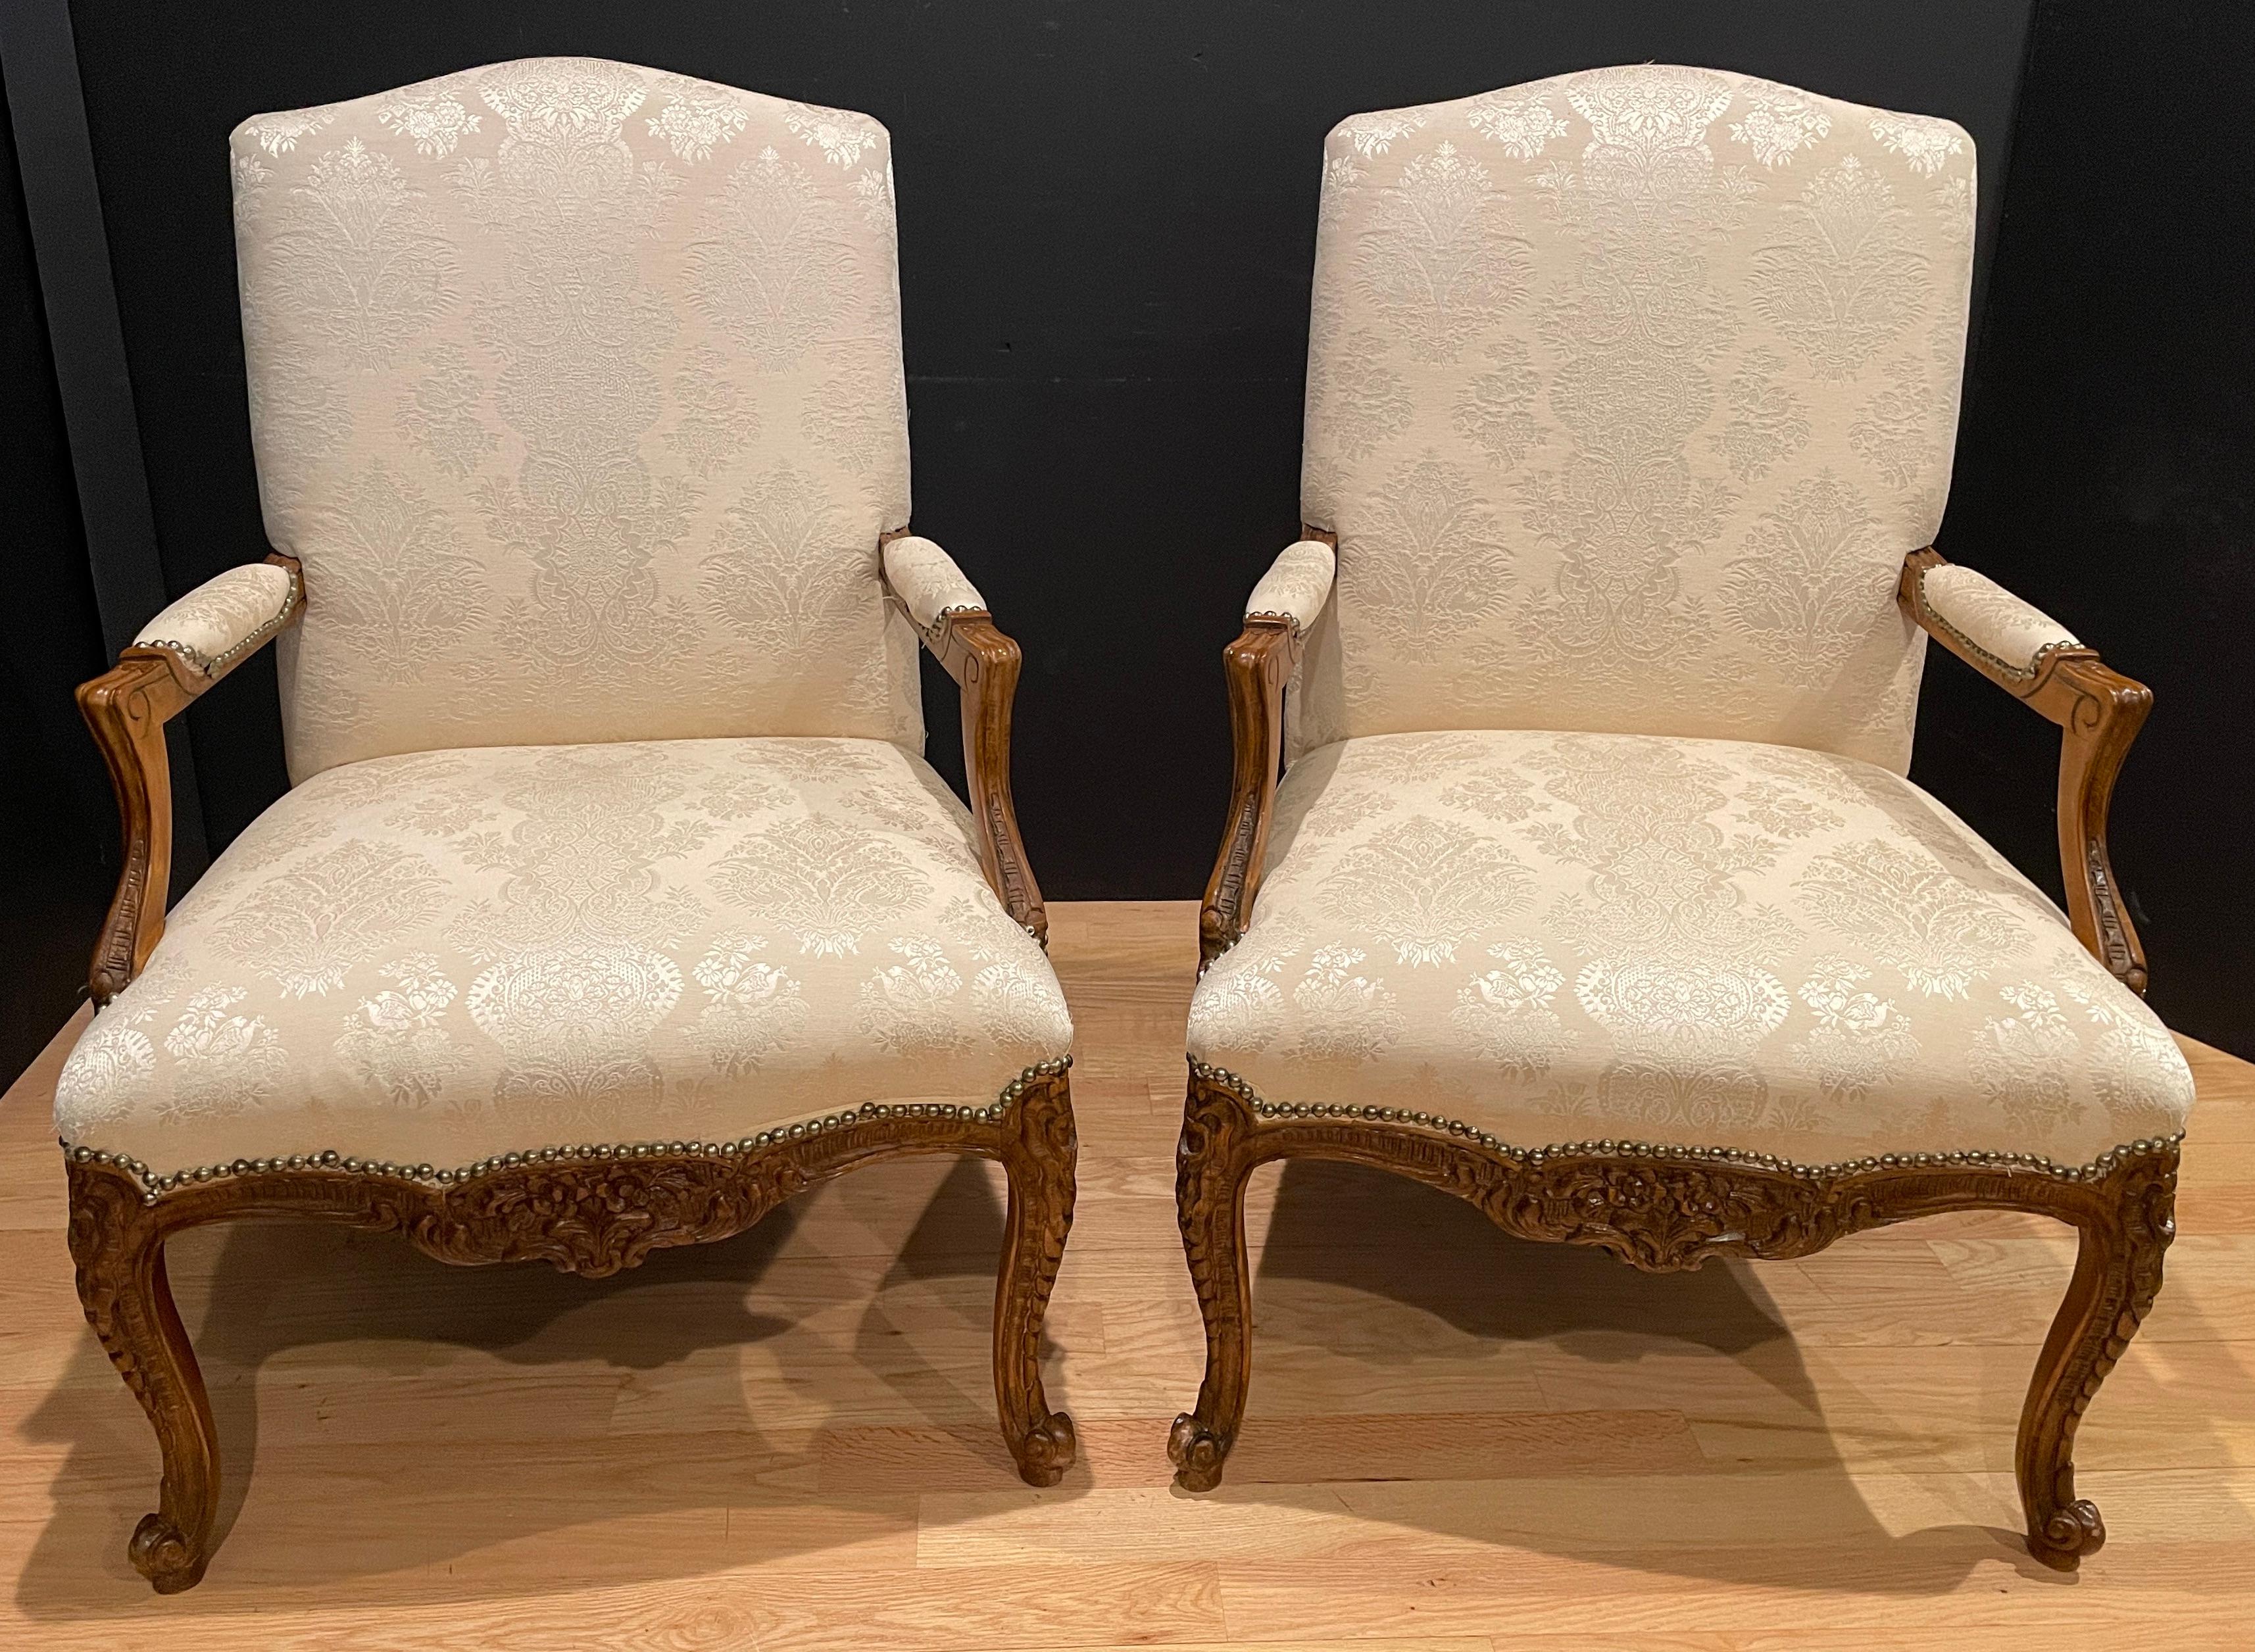 Pair of hand carved walnut oversized vintage Louis XV style fauteuil armchairs. Beautifully upholstered in off-white damask with nail head details.